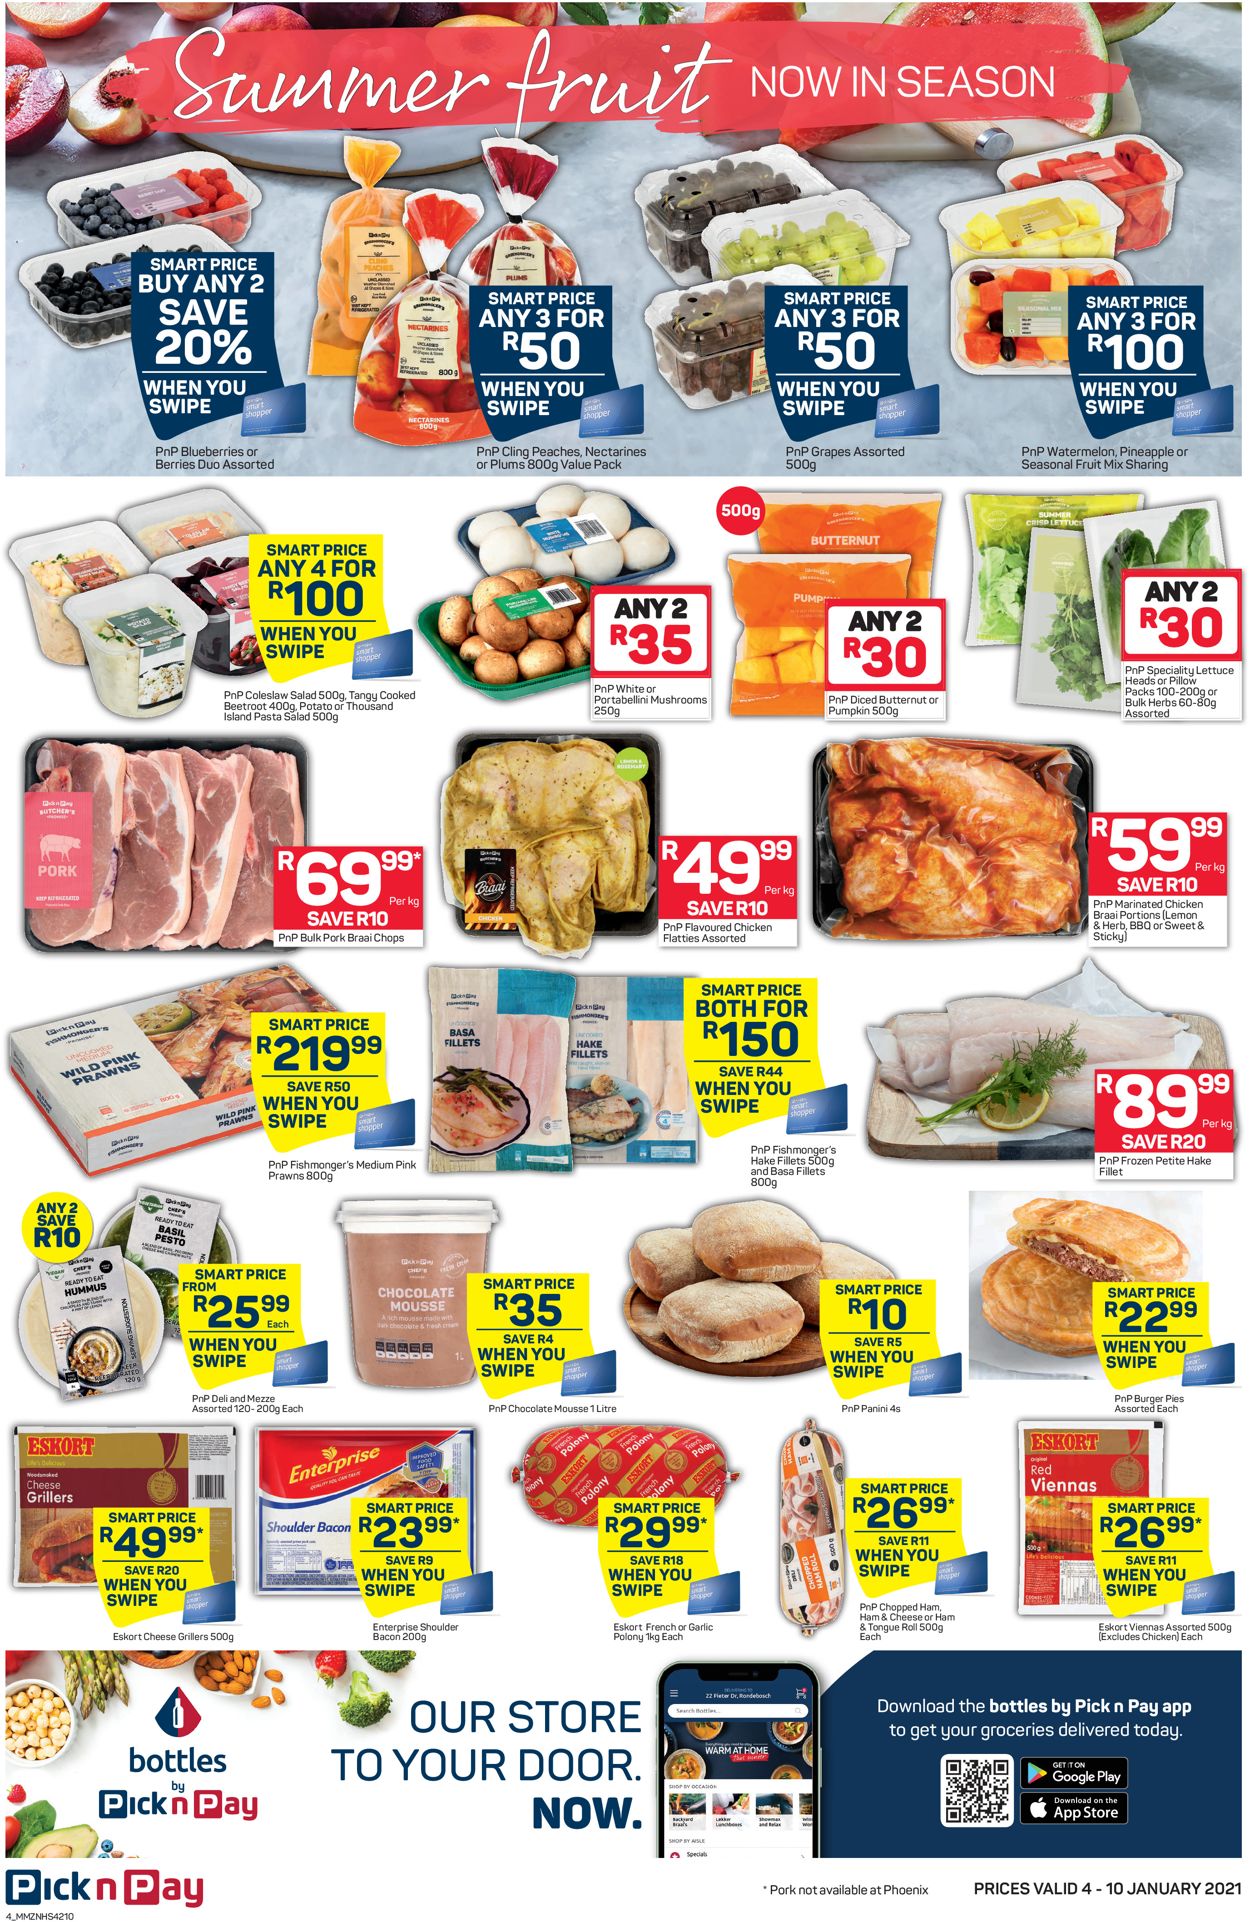 Pick n Pay Smart Price 2021 Catalogue - 2021/01/04-2021/01/10 (Page 4)